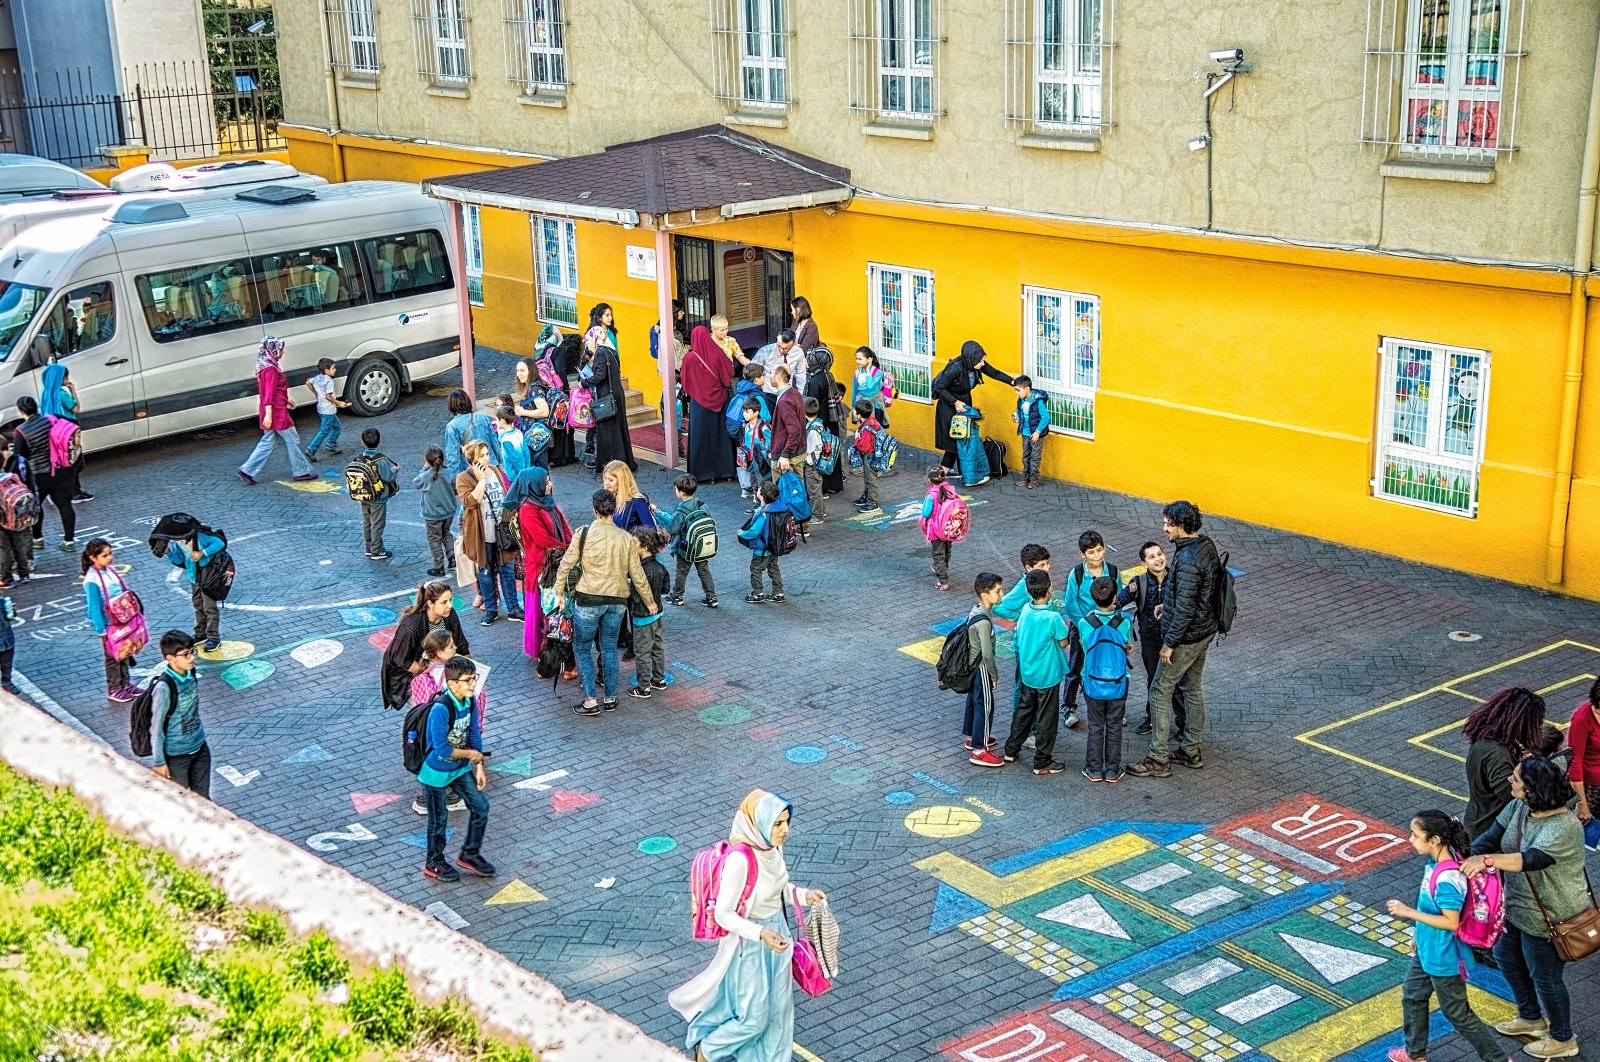 Students are seen with their parents at a courtyard of a primary school in Beyoğlu district, Istanbul, Türkiye, Oct. 6, 2017. (Shutterstock Photo)